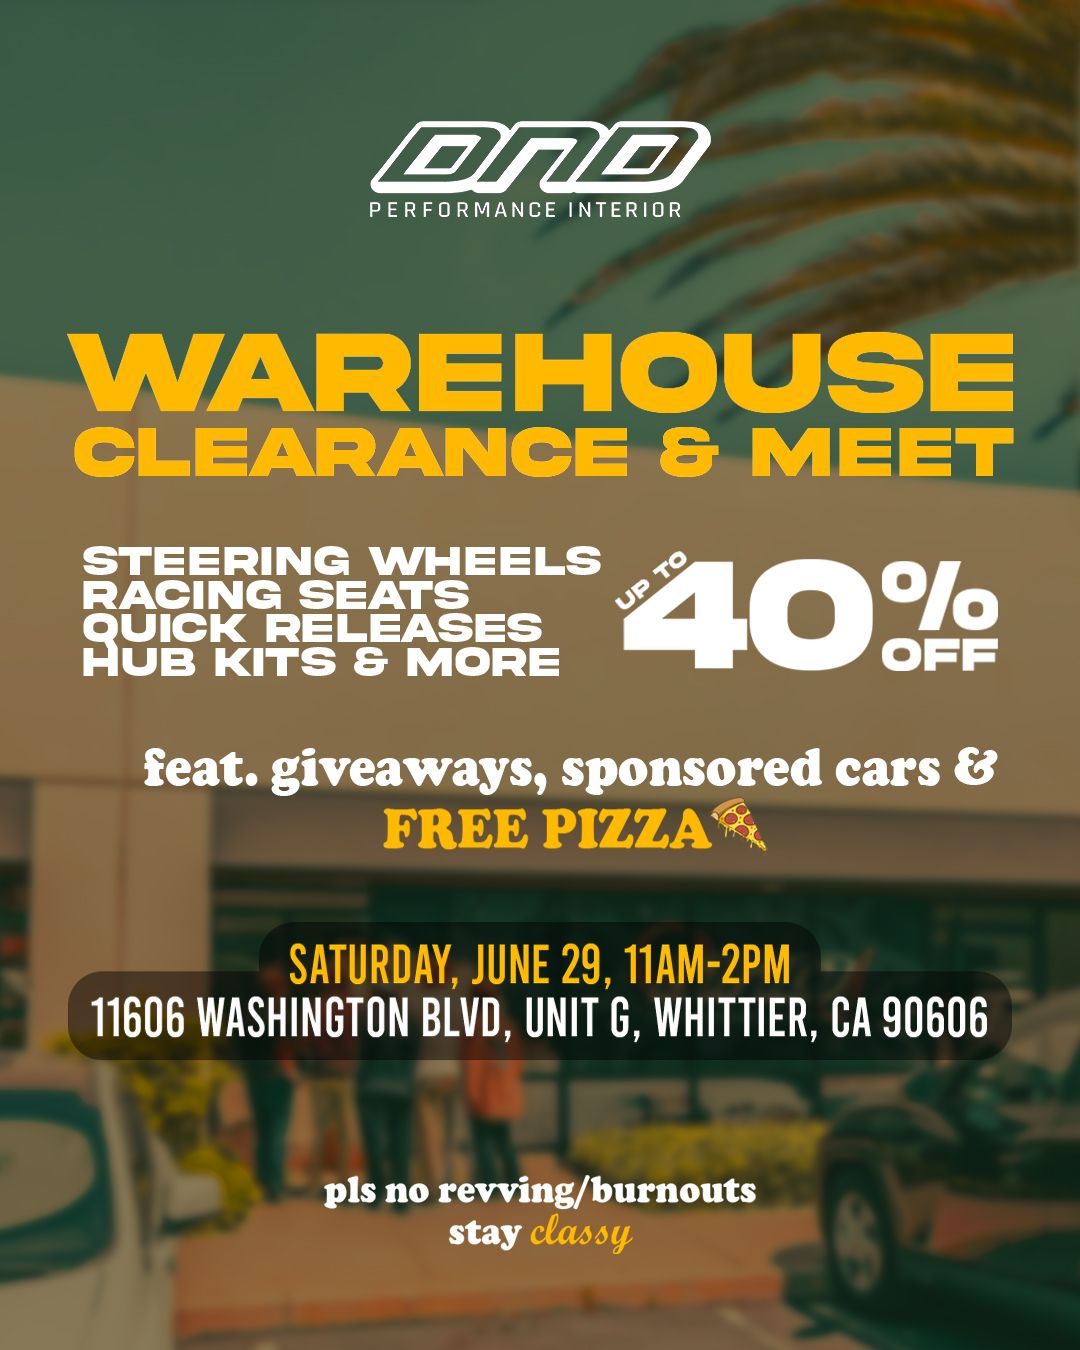 DND WAREHOUSE CLEARANCE AND MEET